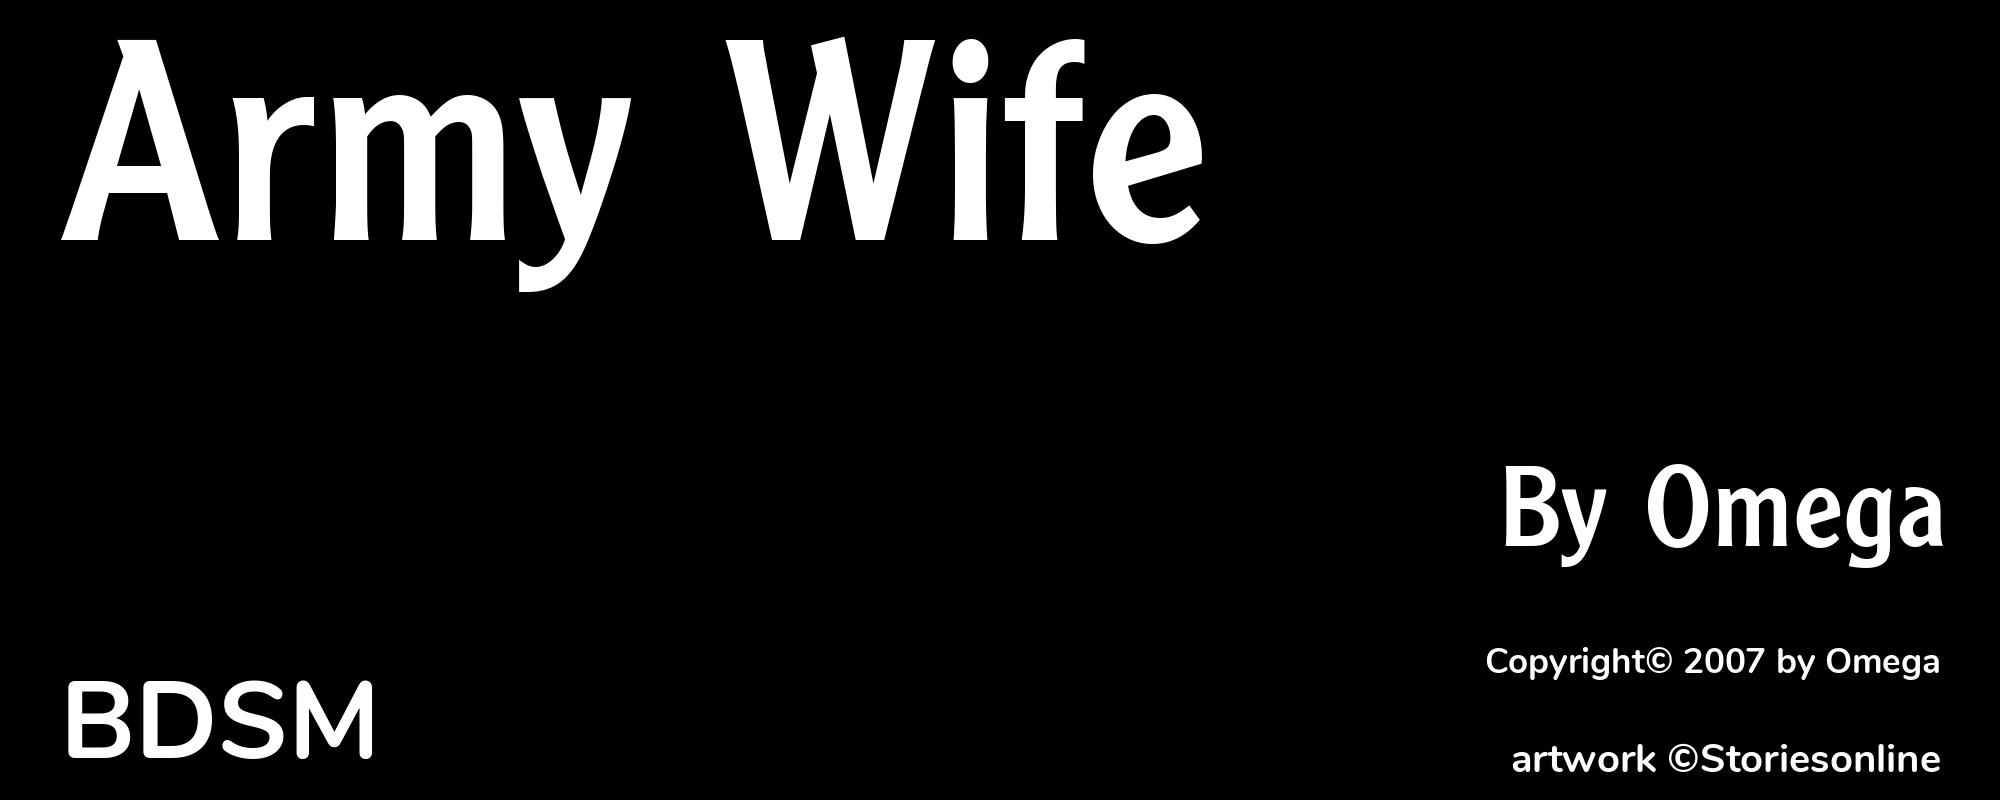 Army Wife - Cover